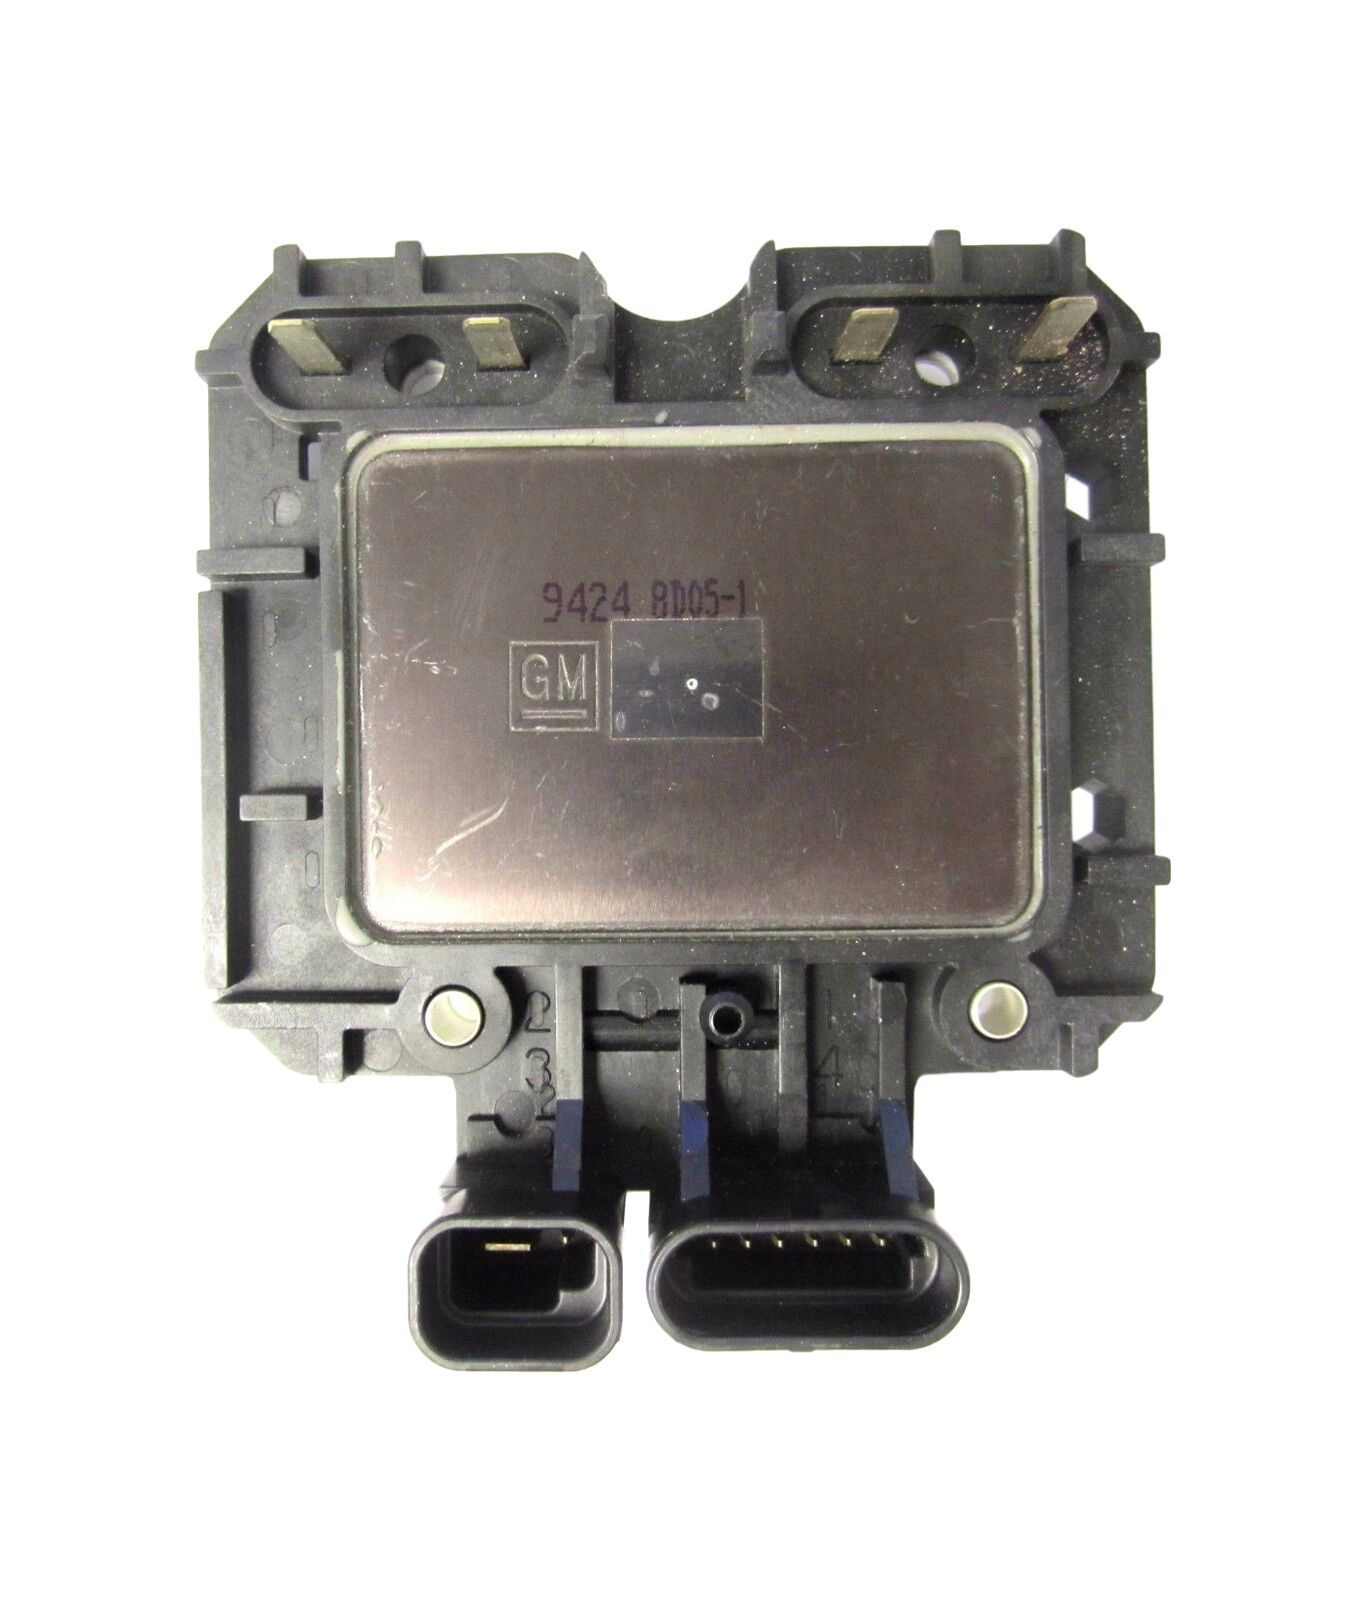 Genuine Delco Remy Ignition Control Module New Free Shipping - $96.88